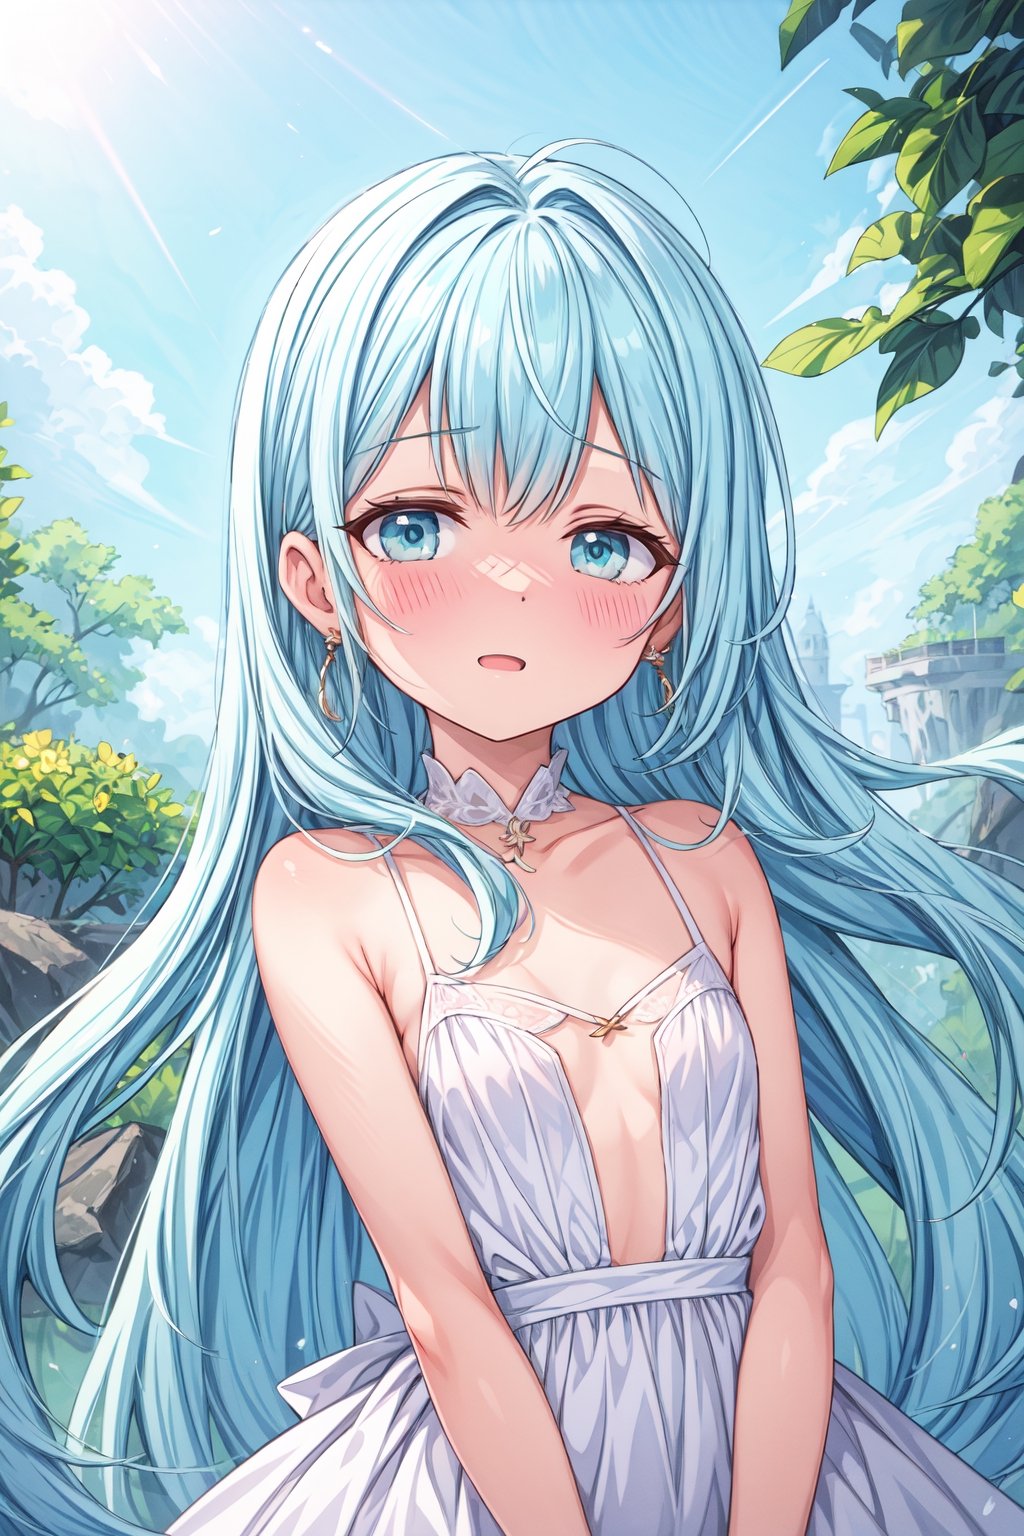 masterpiece, best quality, extremely detailed, (illustration, official art:1.1), 1 girl ,(((( light blue long hair)))), light blue hair, ,10 years old, long hair ((blush)) , cute face, big eyes, masterpiece, best quality,(((((a very delicate and beautiful girl))))),Amazing,beautiful detailed eyes,blunt bangs((((little delicate girl)))),tareme(true beautiful:1.2), sense of depth,dynamic angle,,,, affectionate smile, (true beautiful:1.2),,(tiny 1girl model:1.2),)(flat chest)),,absurdres, High Detail, Ultra Detail, 8K, Shy girl (blushing), ((shy)) expression, lake, delicate, beautiful detailed, colourful, finely detailed, detailed lips, intricate details, (50mm Sigma f/1.4 ZEISS lens, F1.4, 1/800s, ISO 100, photograpy:1.1), solo, looking_at_viewer, from_front, earrings, slim, model, romantic atmoshere, (photorealistic:1.3), lens flare, masterpiece
